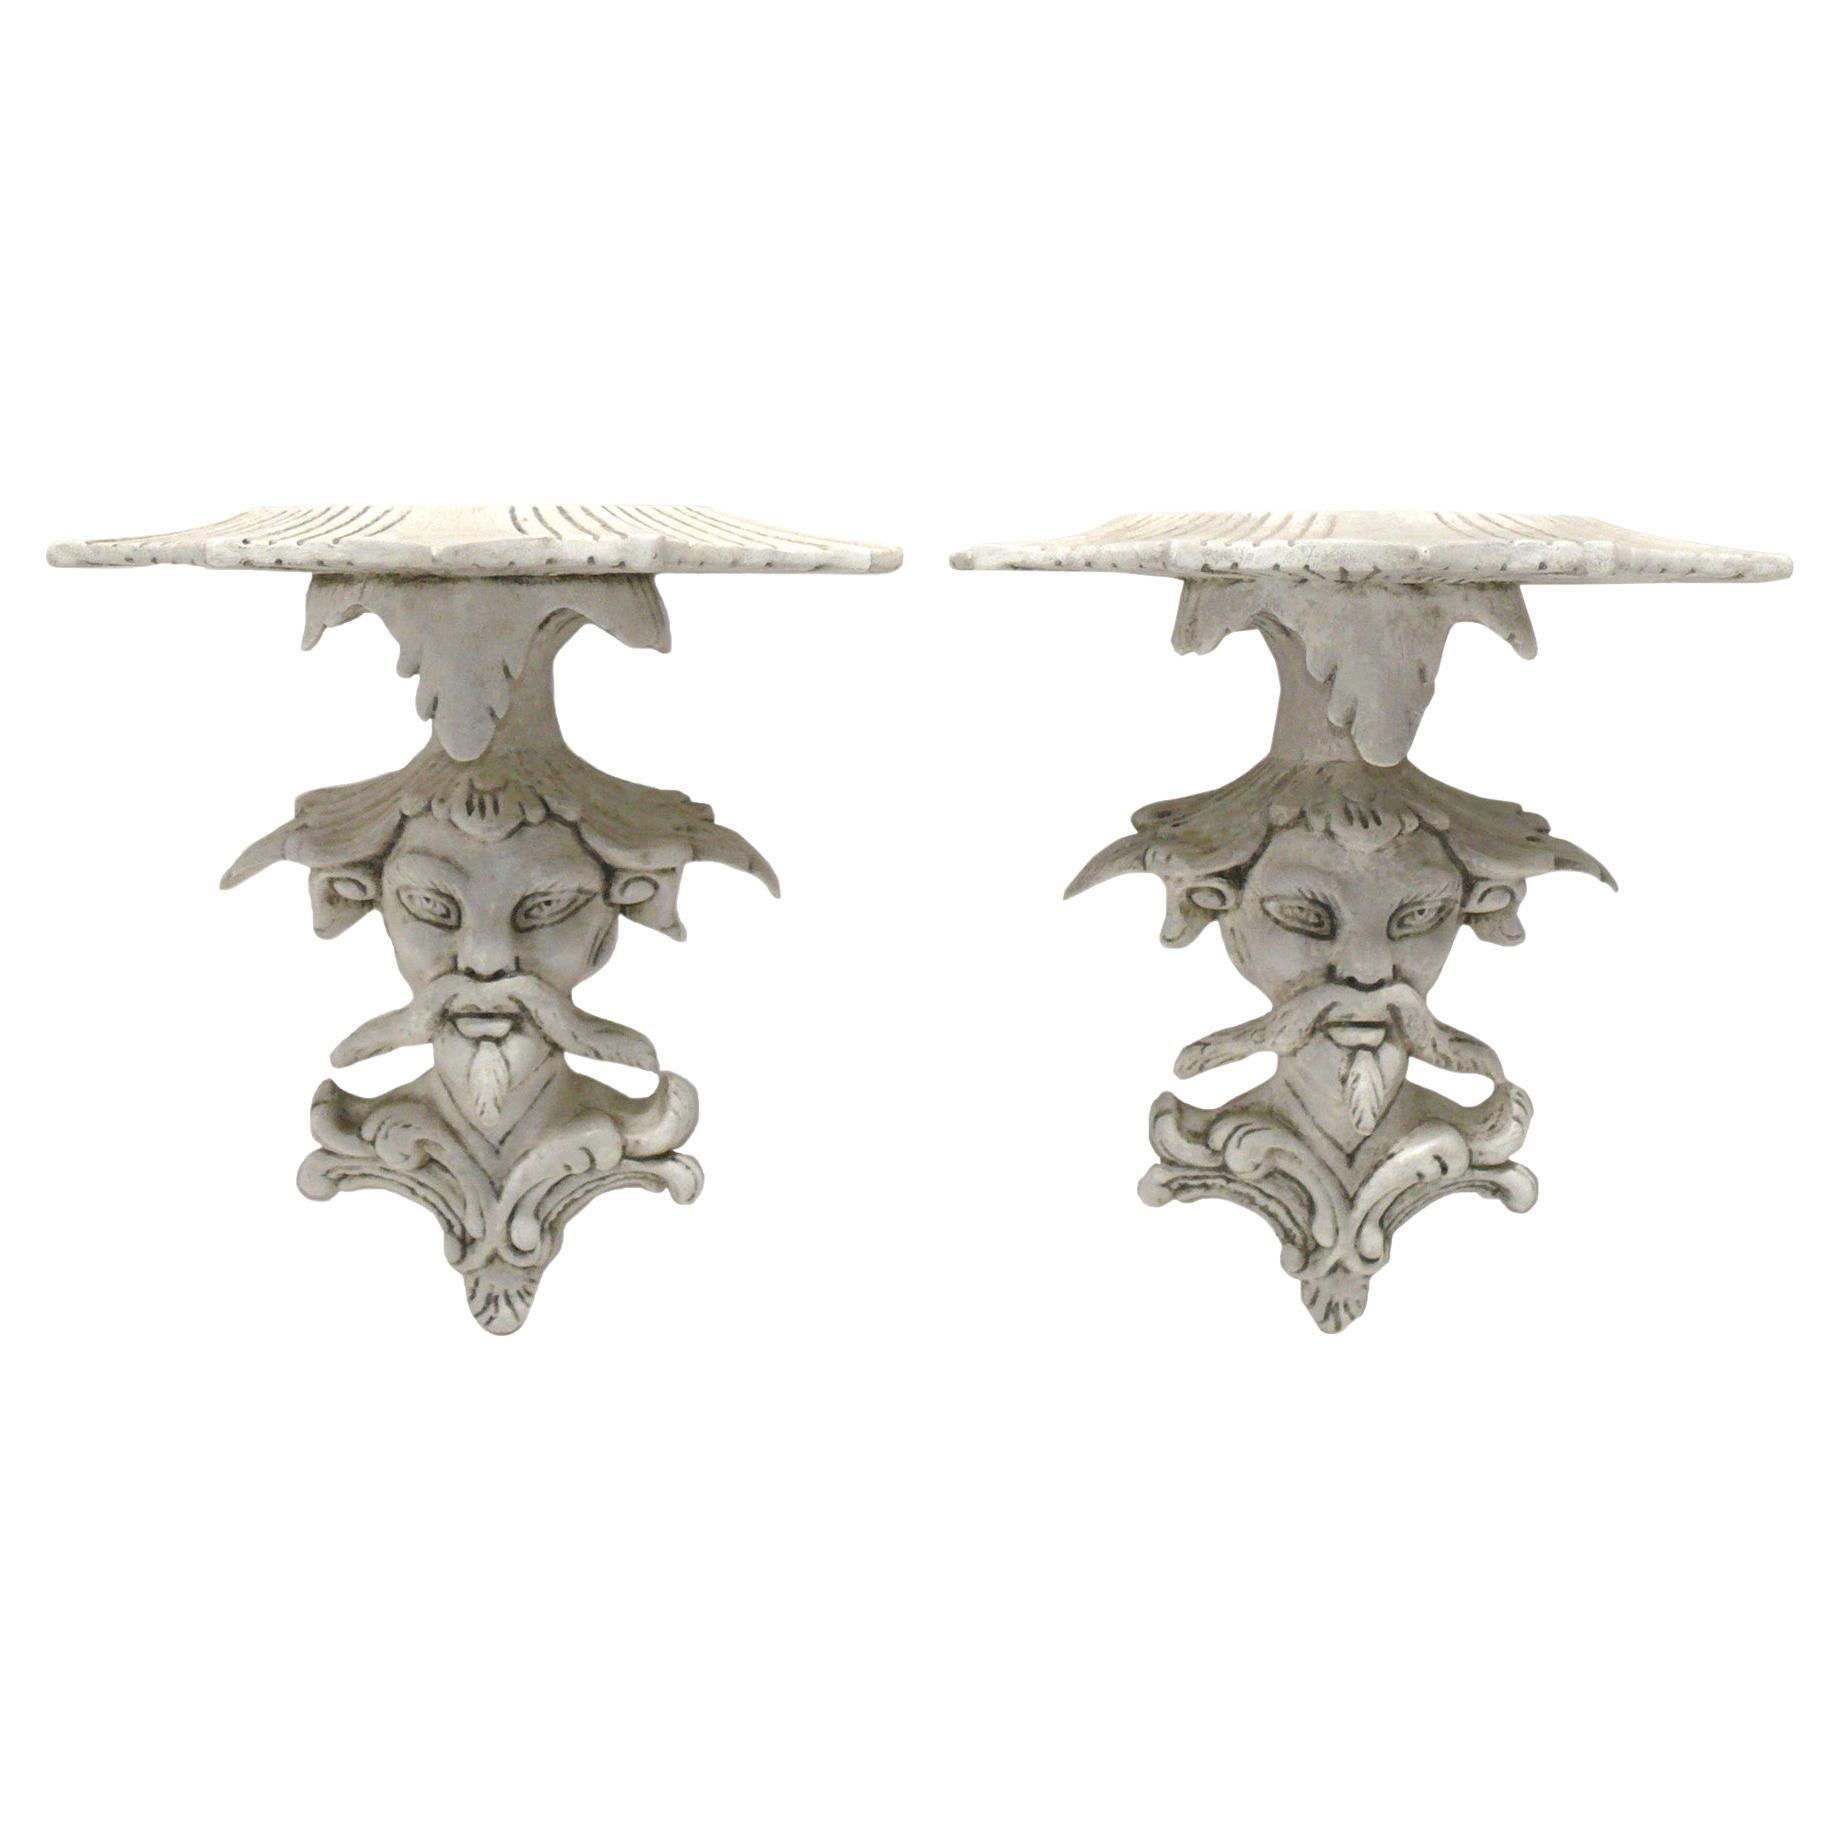 Chinoiserie Wall Shelves or Brackets